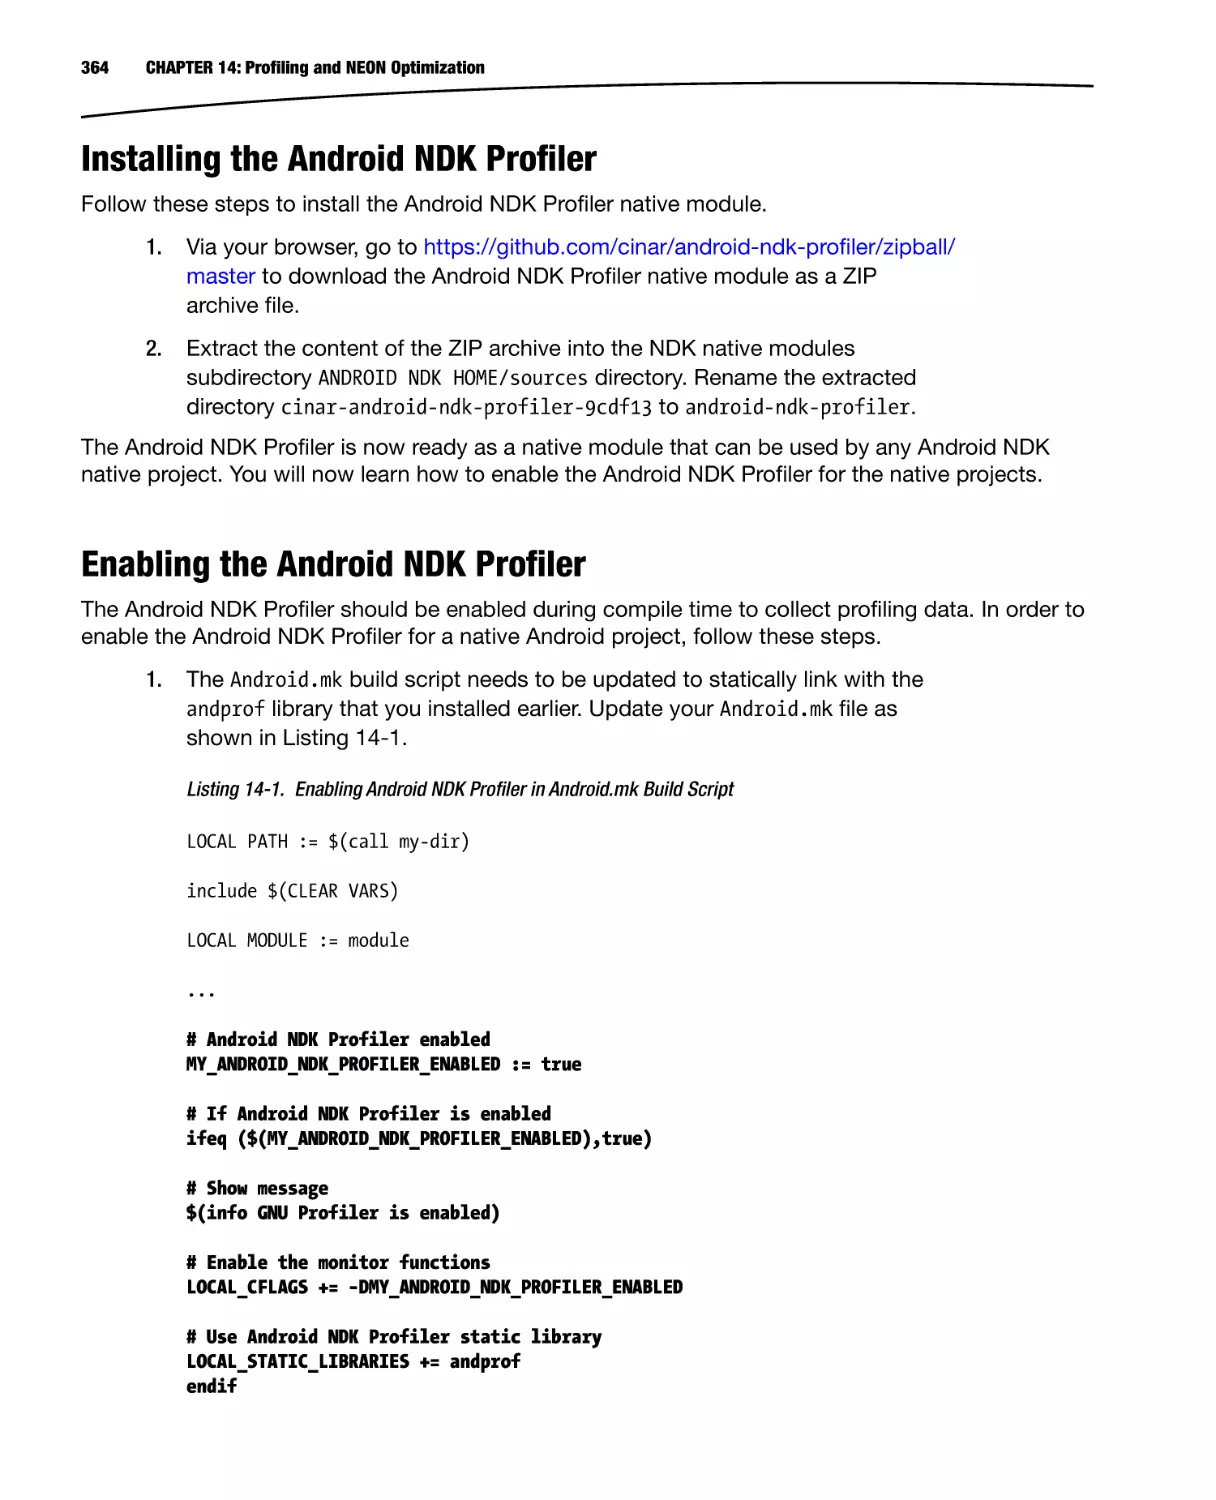 Installing the Android NDK Profiler
Enabling the Android NDK Profiler